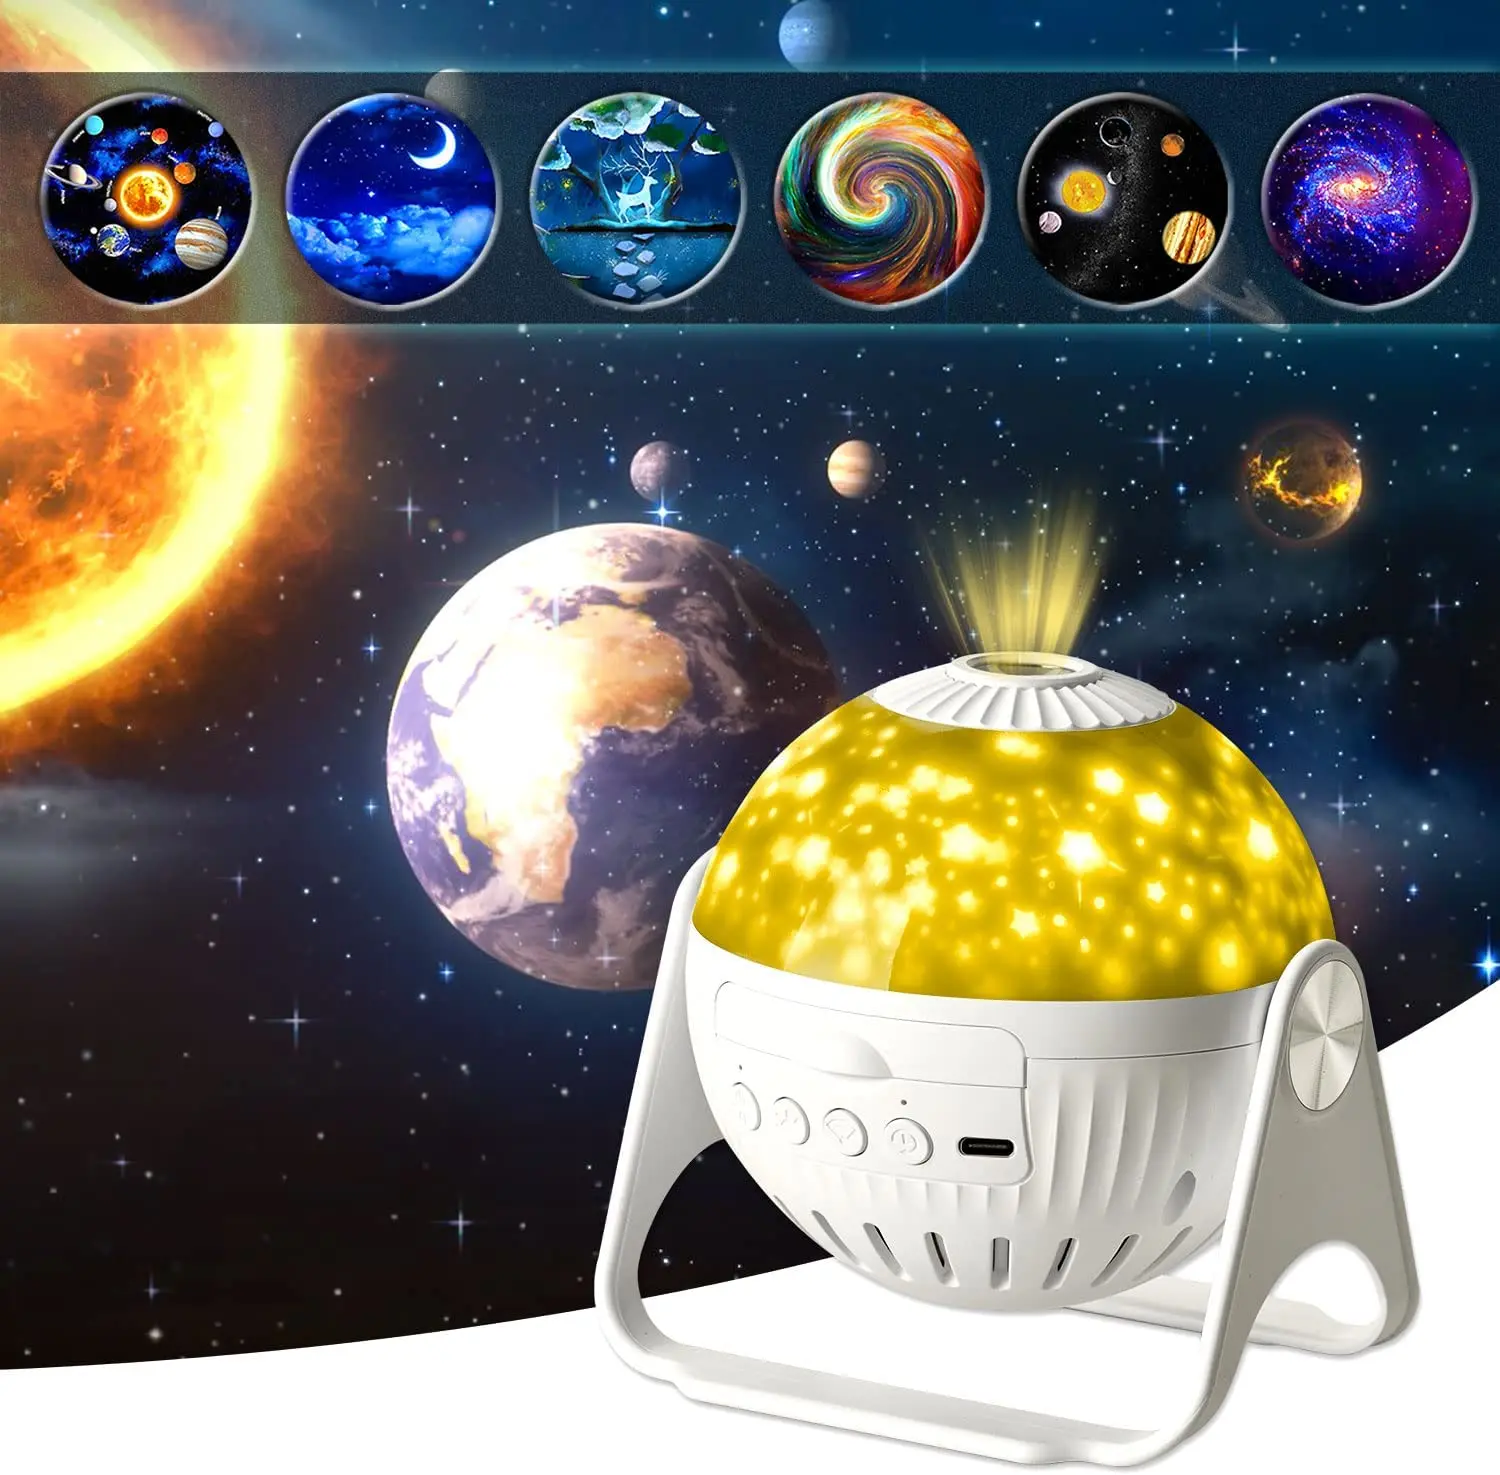 LED Star Planetarium Galaxy Projector 7 in 1 360° Rotate Night Lights Projector Lamp for Home Bedroom Room Decoraion Kids Gifts